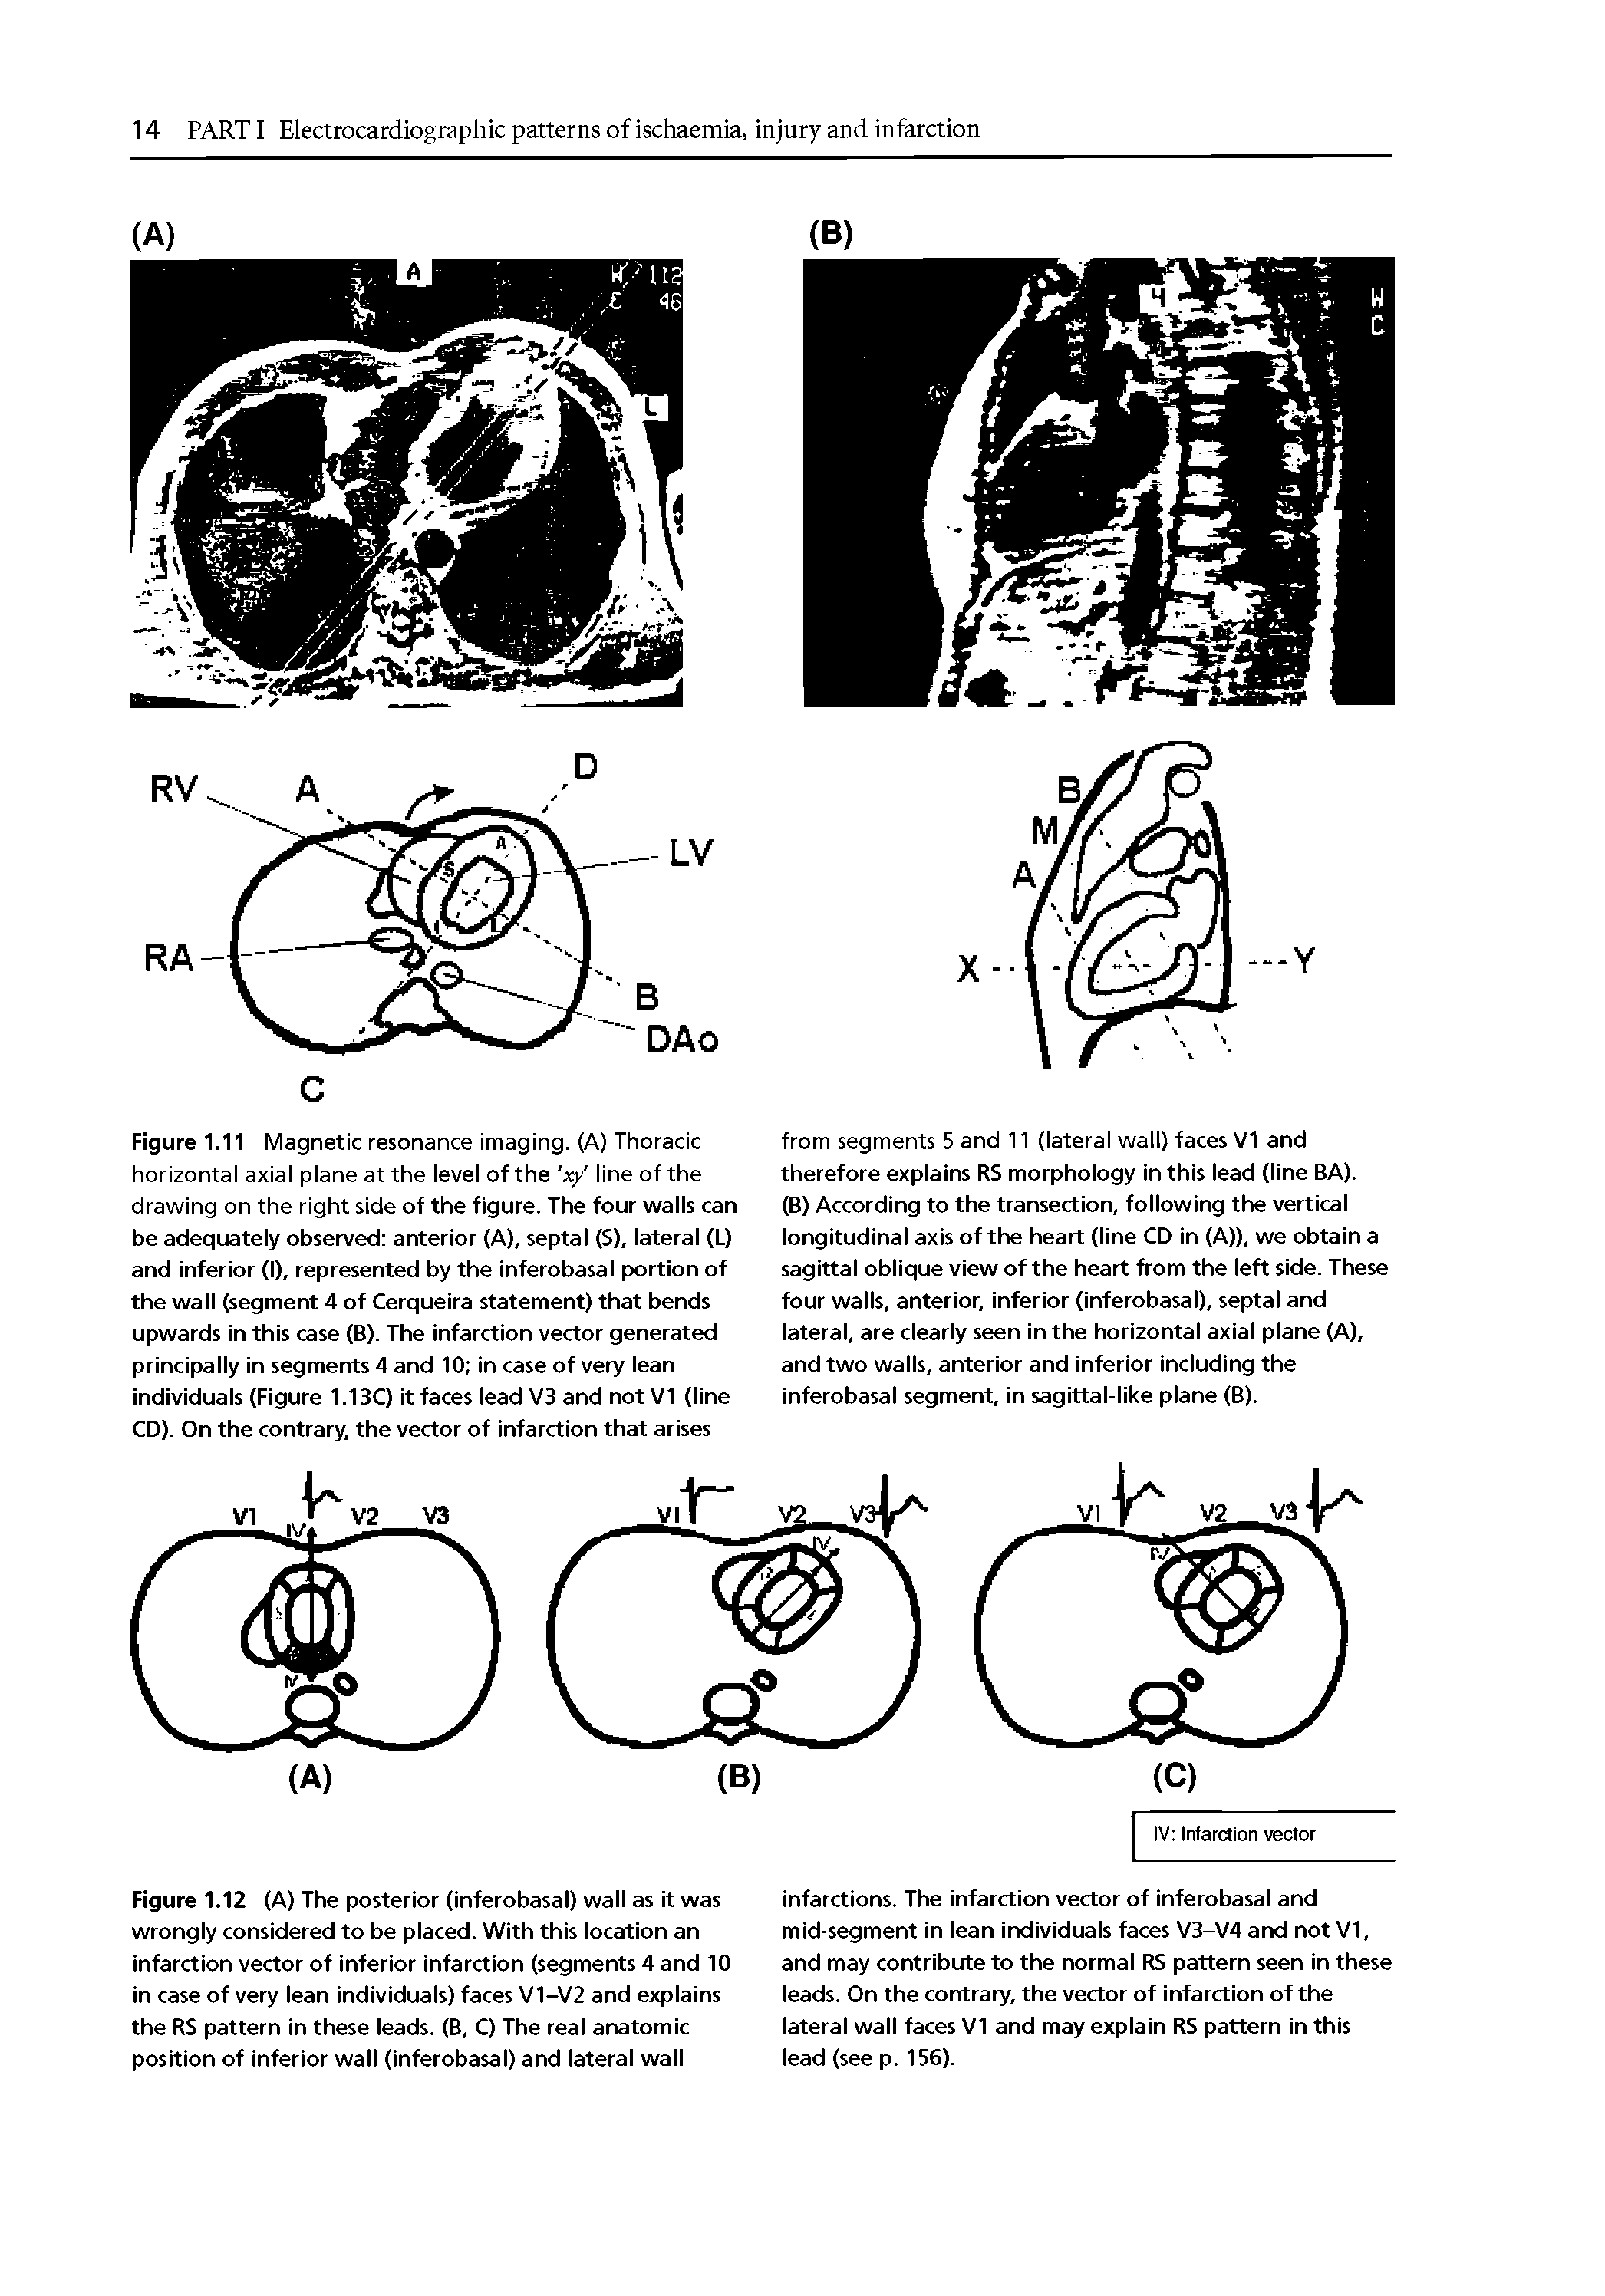 Figure 1.11 Magnetic resonance imaging. (A) Thoracic horizontal axial plane at the level of the xy line of the drawing on the right side of the figure. The four walls can be adequately observed anterior (A), septal (S), lateral (L) and inferior (I), represented by the inferobasal portion of the wall (segment 4 of Cerqueira statement) that bends upwards in this case (B). The infarction vector generated principally in segments 4 and 10 in case of very lean individuals (Figure 1.13C) it faces lead V3 and not V1 (line CD). On the contrary, the vector of infarction that arises...